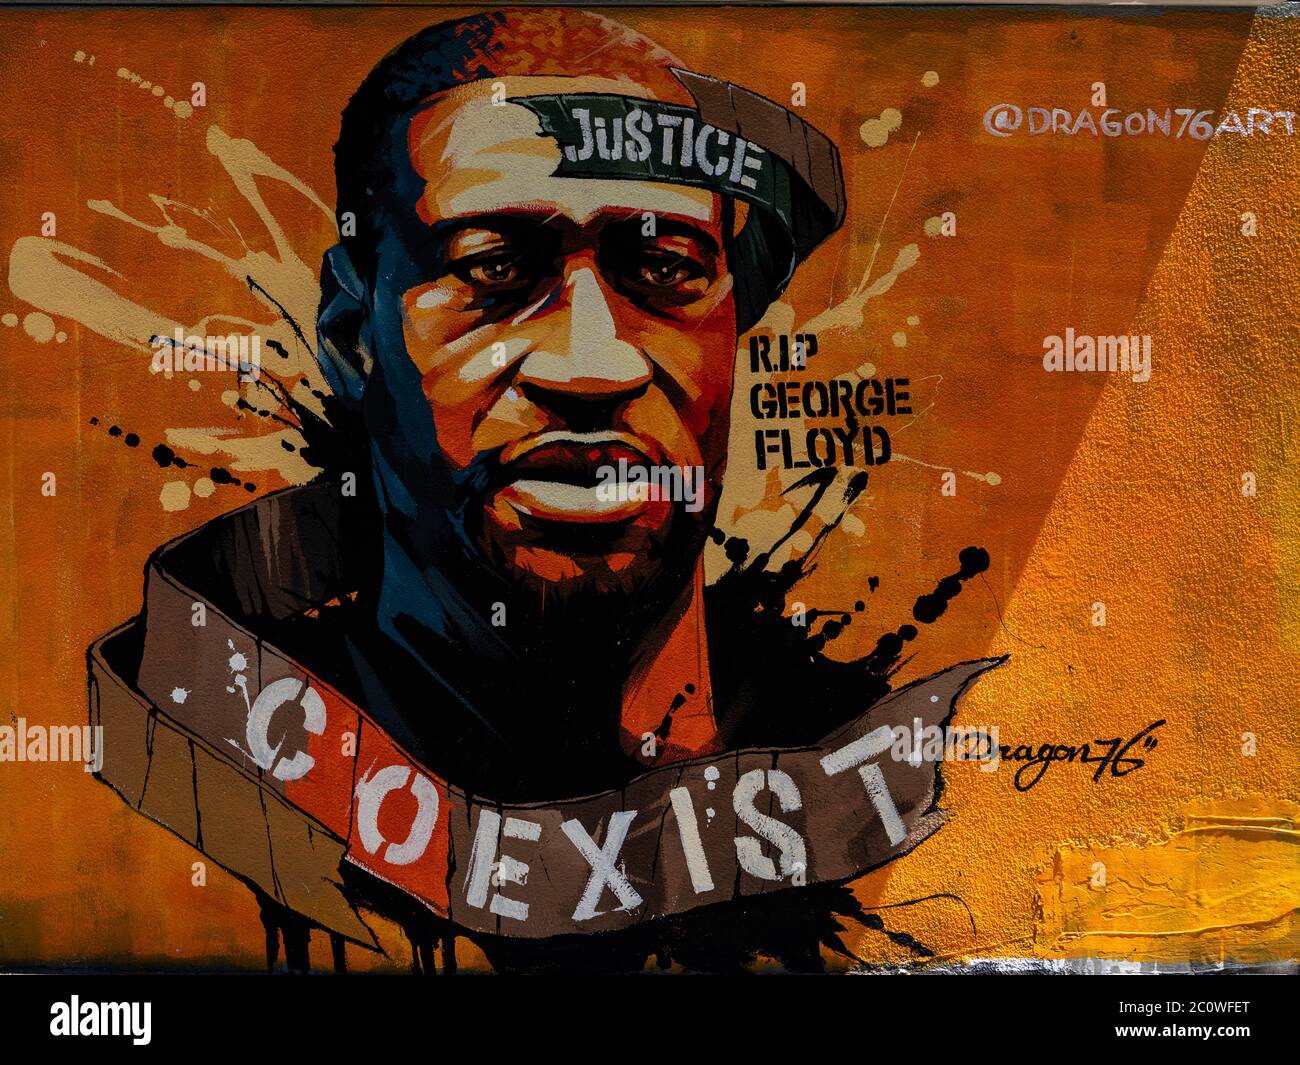 New York, New York, USA. 12th June, 2020. New York, New York, U.S.: street artist Dragon76 painted a mural in honor of George Floyd in East Village during the peaceful protests opposing systemic racism and police brutality. Credit: Corine Sciboz/ZUMA Wire/Alamy Live News Stock Photo